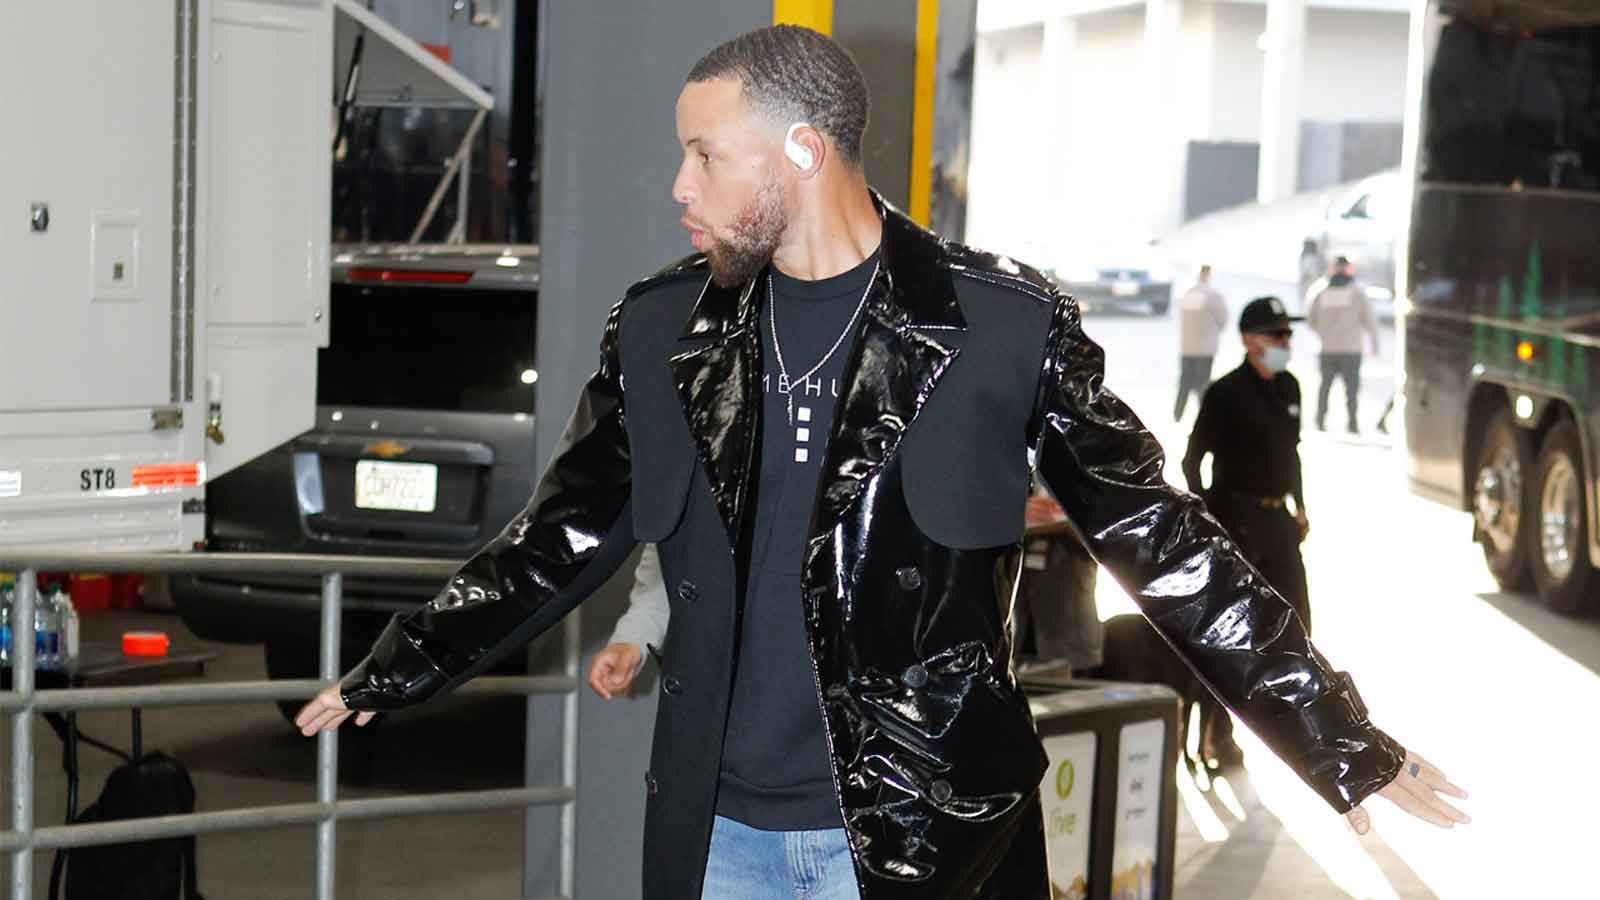 Where can I find this coat and pants? Steph Curry outfit : r